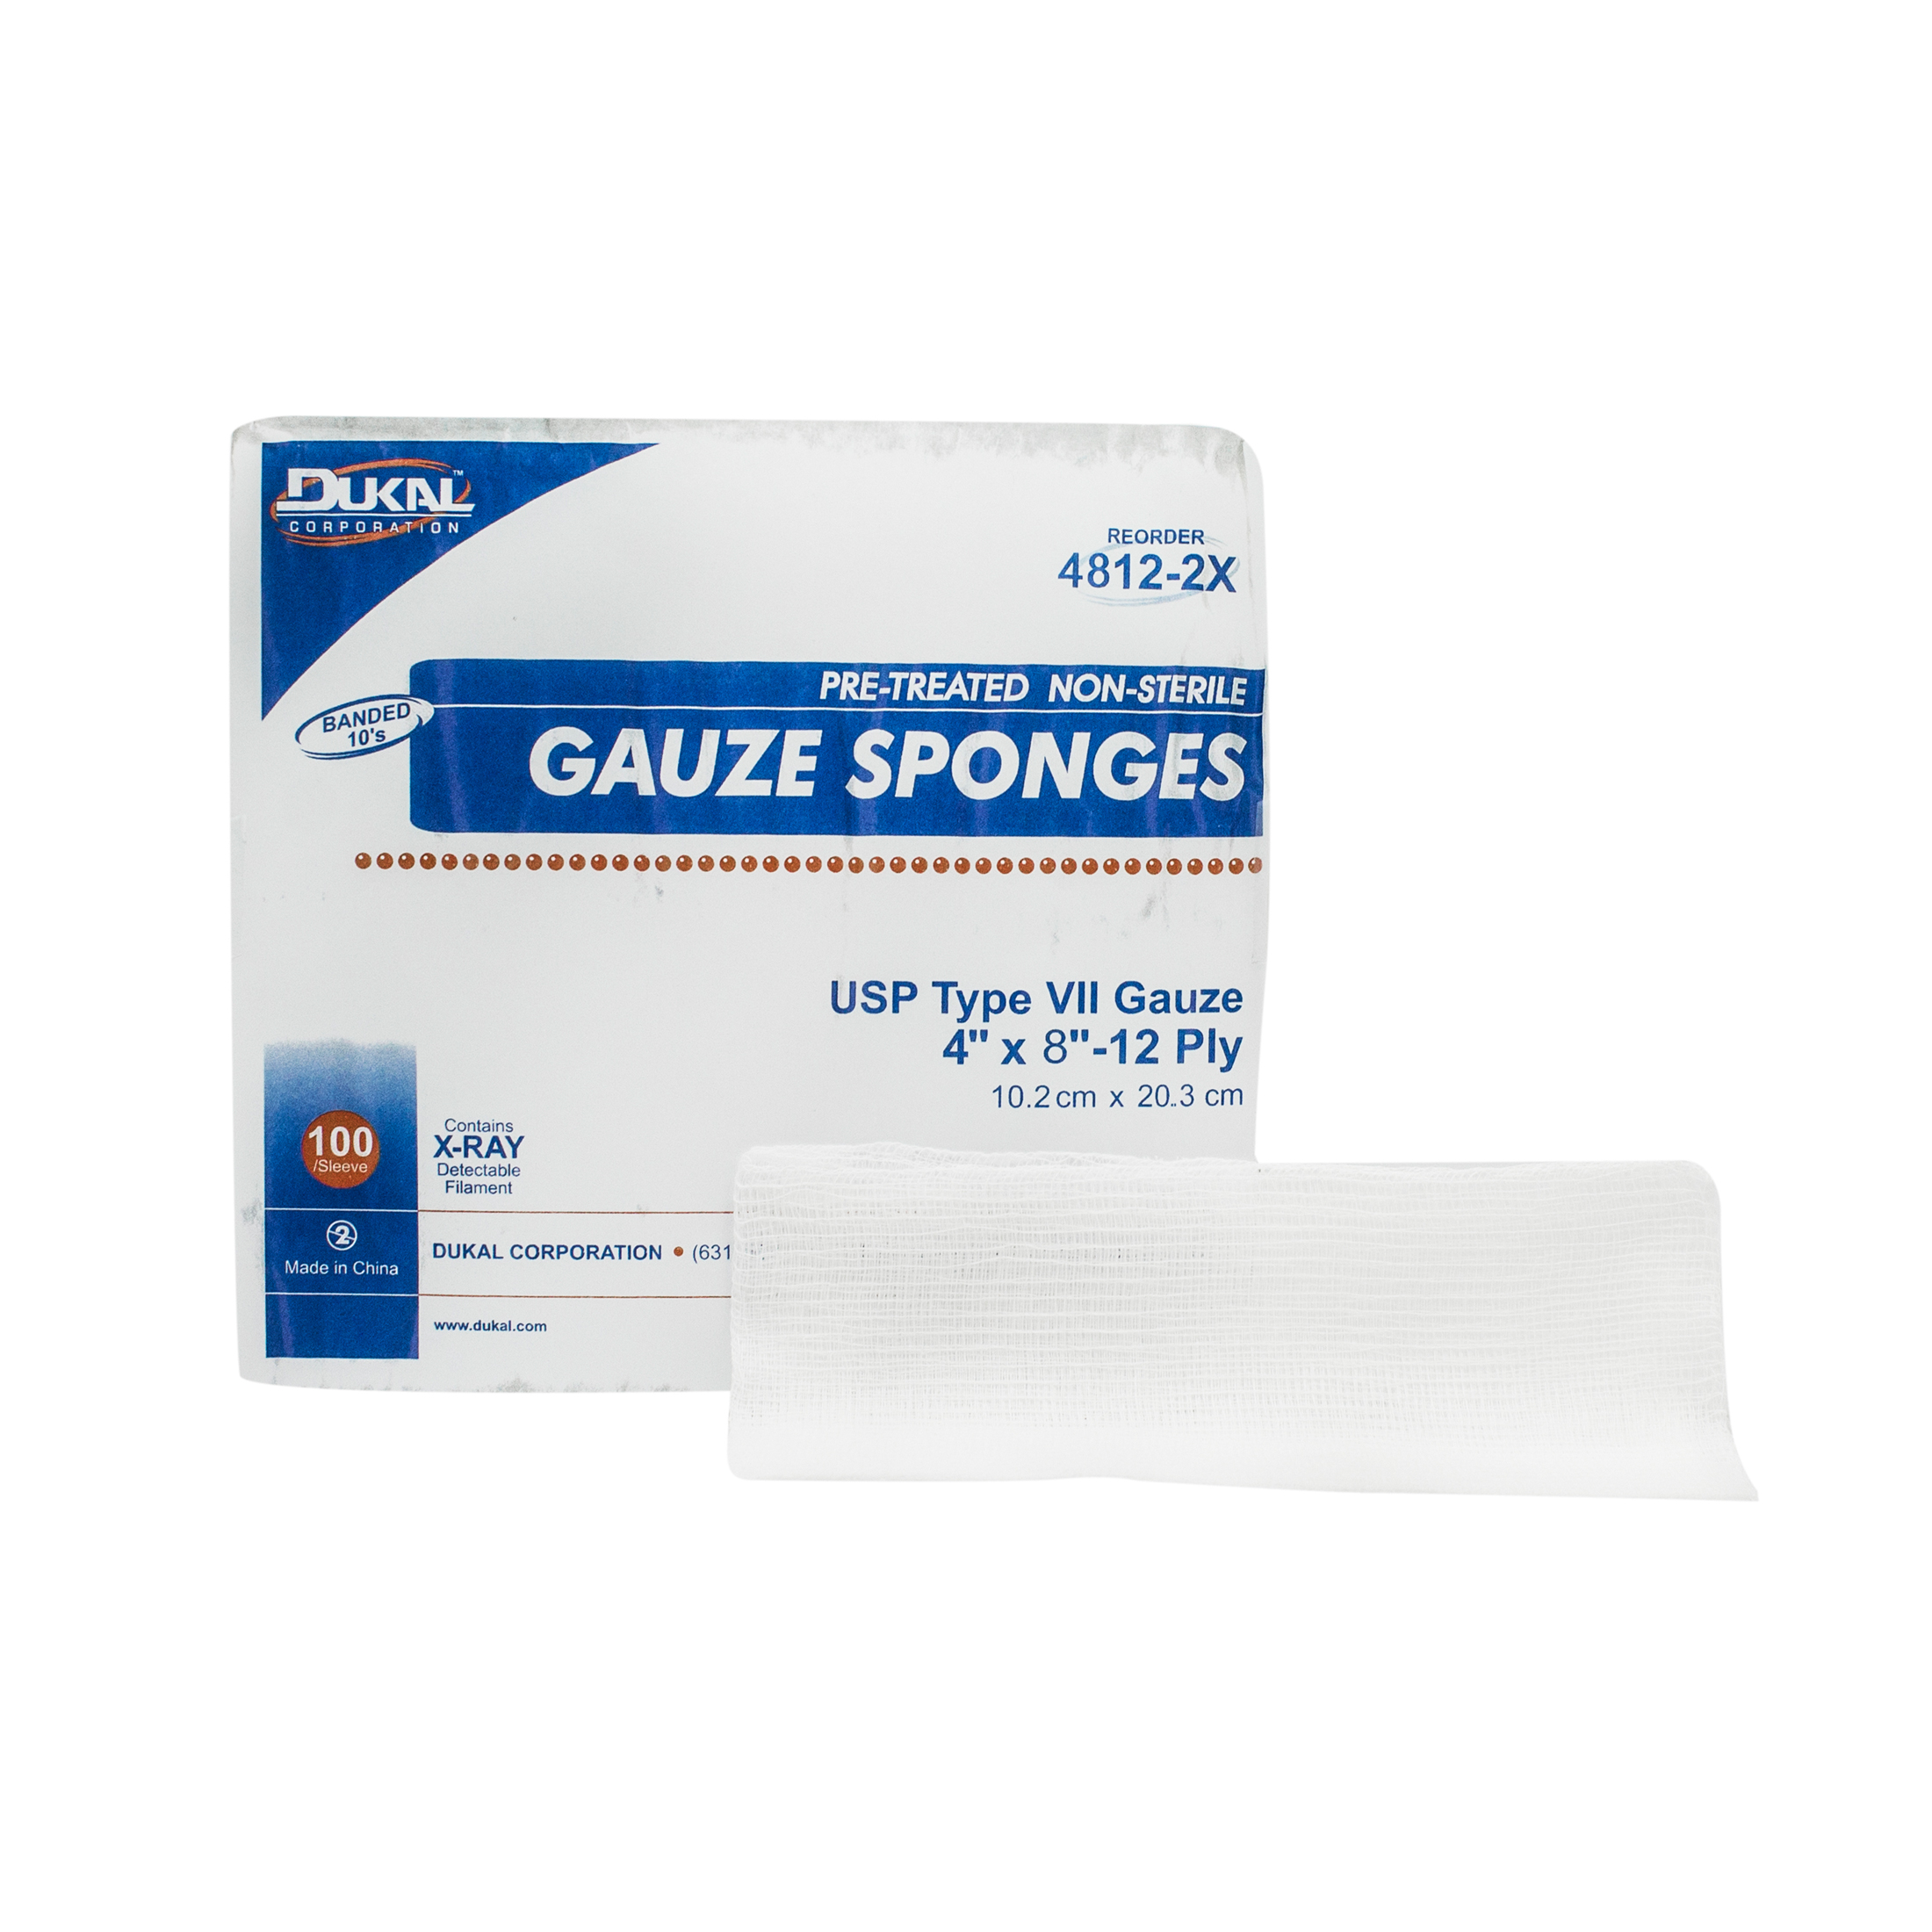 8" x 4" Sponges Products, Supplies and Equipment